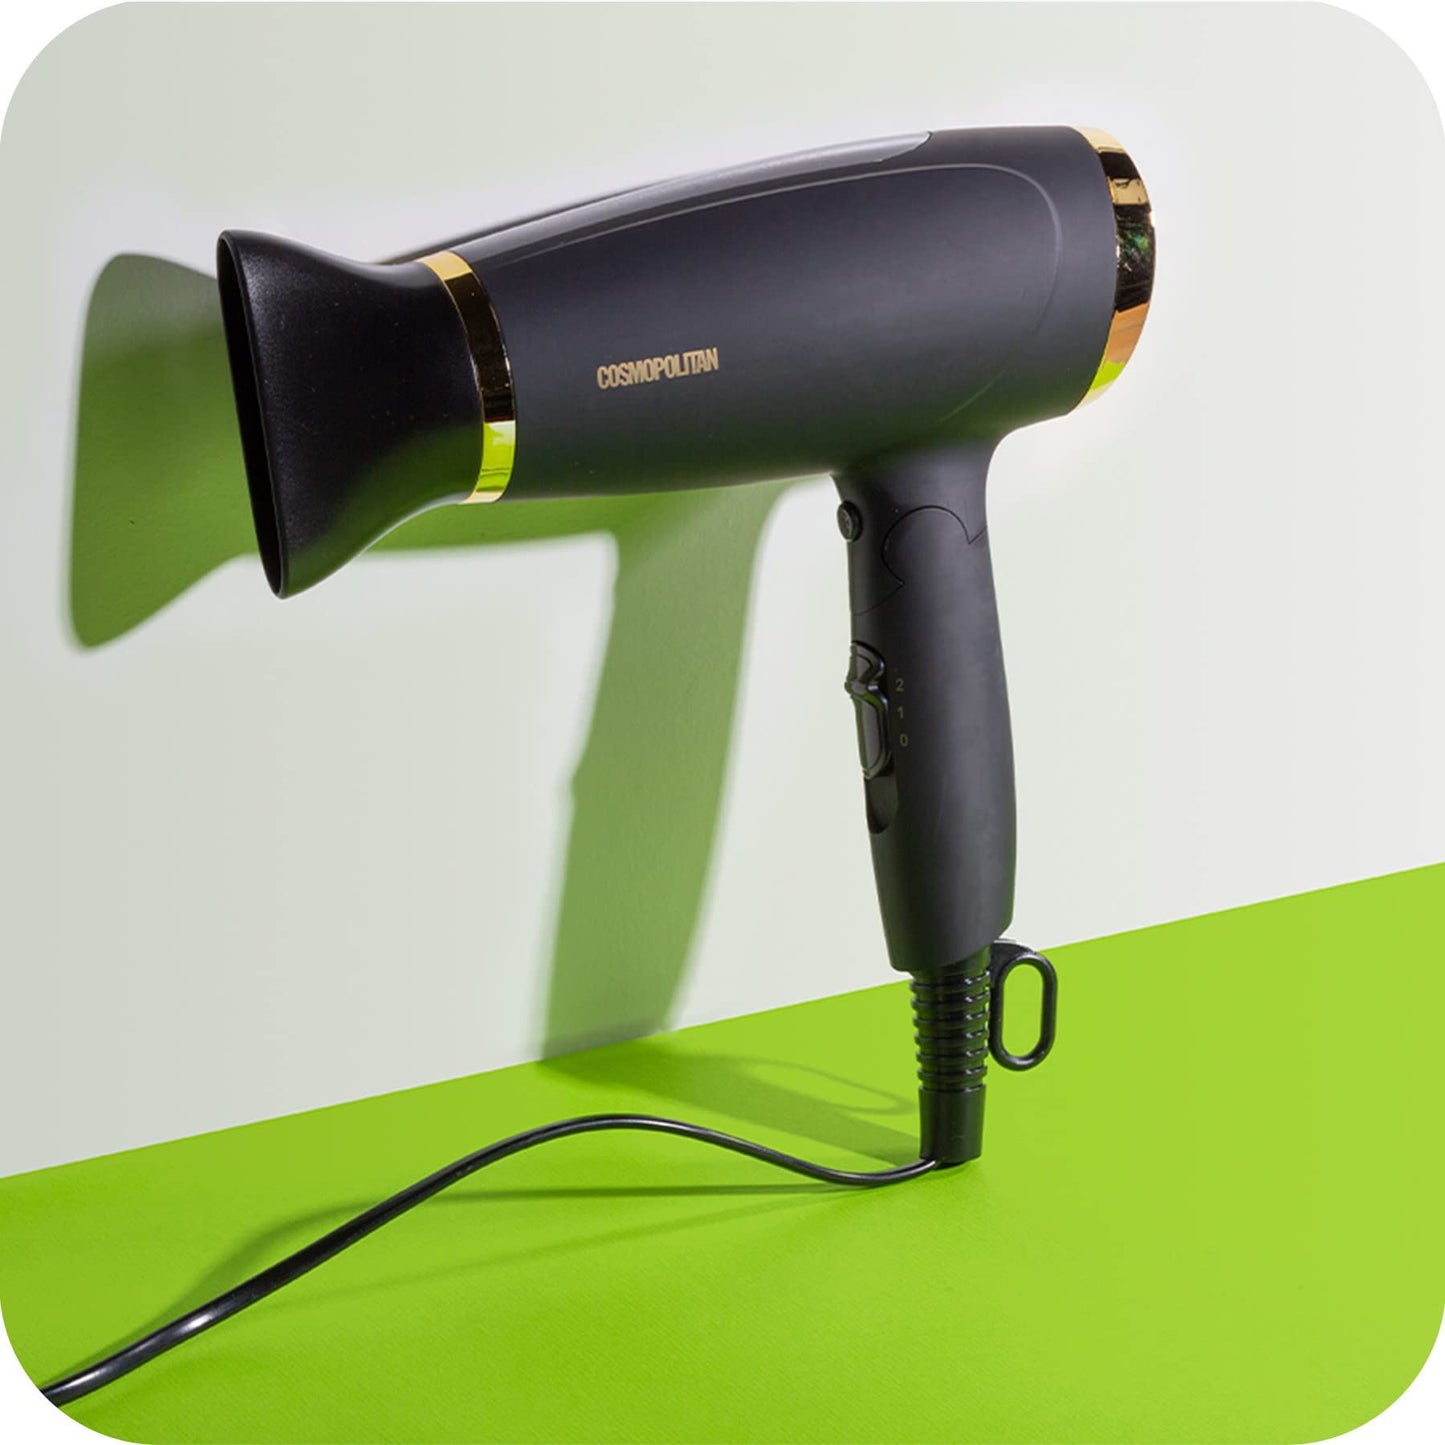 Cosmopolitan Hairdryer for Travel & Home with Foldable Handle, Full Size Portable Hair Dryer, 2 Speed Settings, Powerful High Speed Blow Dryer, Beauty & Personal Care Tool, 1800-2200W - Black & Gold